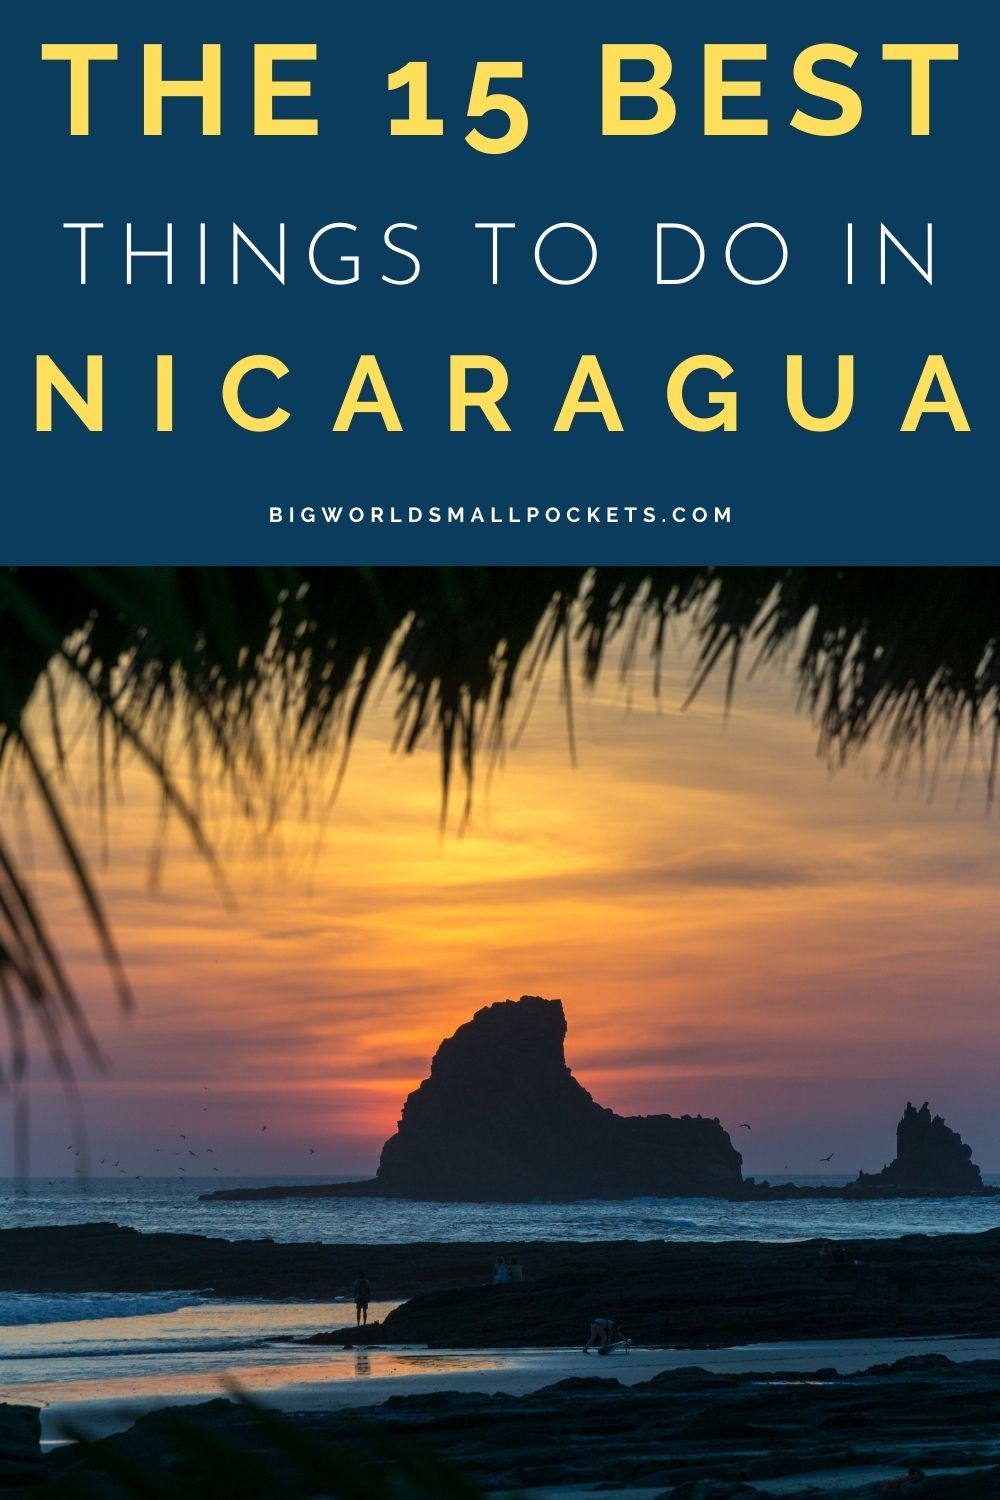 The 15 Best Things To Do in Nicaragua